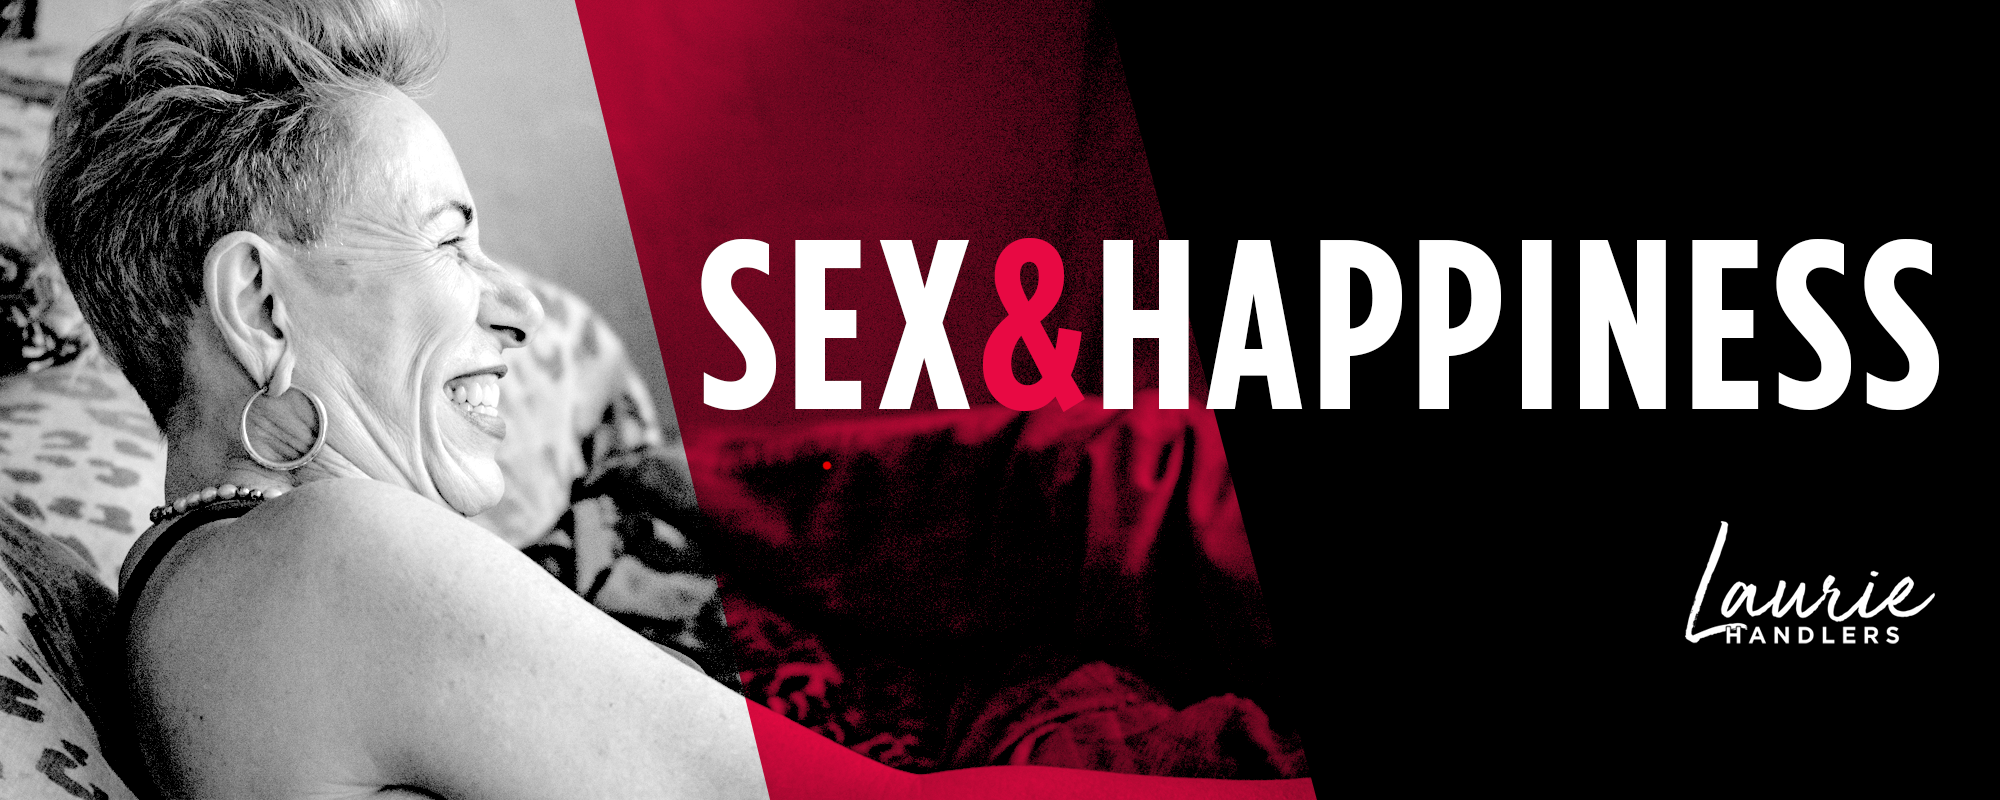 SEx & Happiness with Laurie Handlers